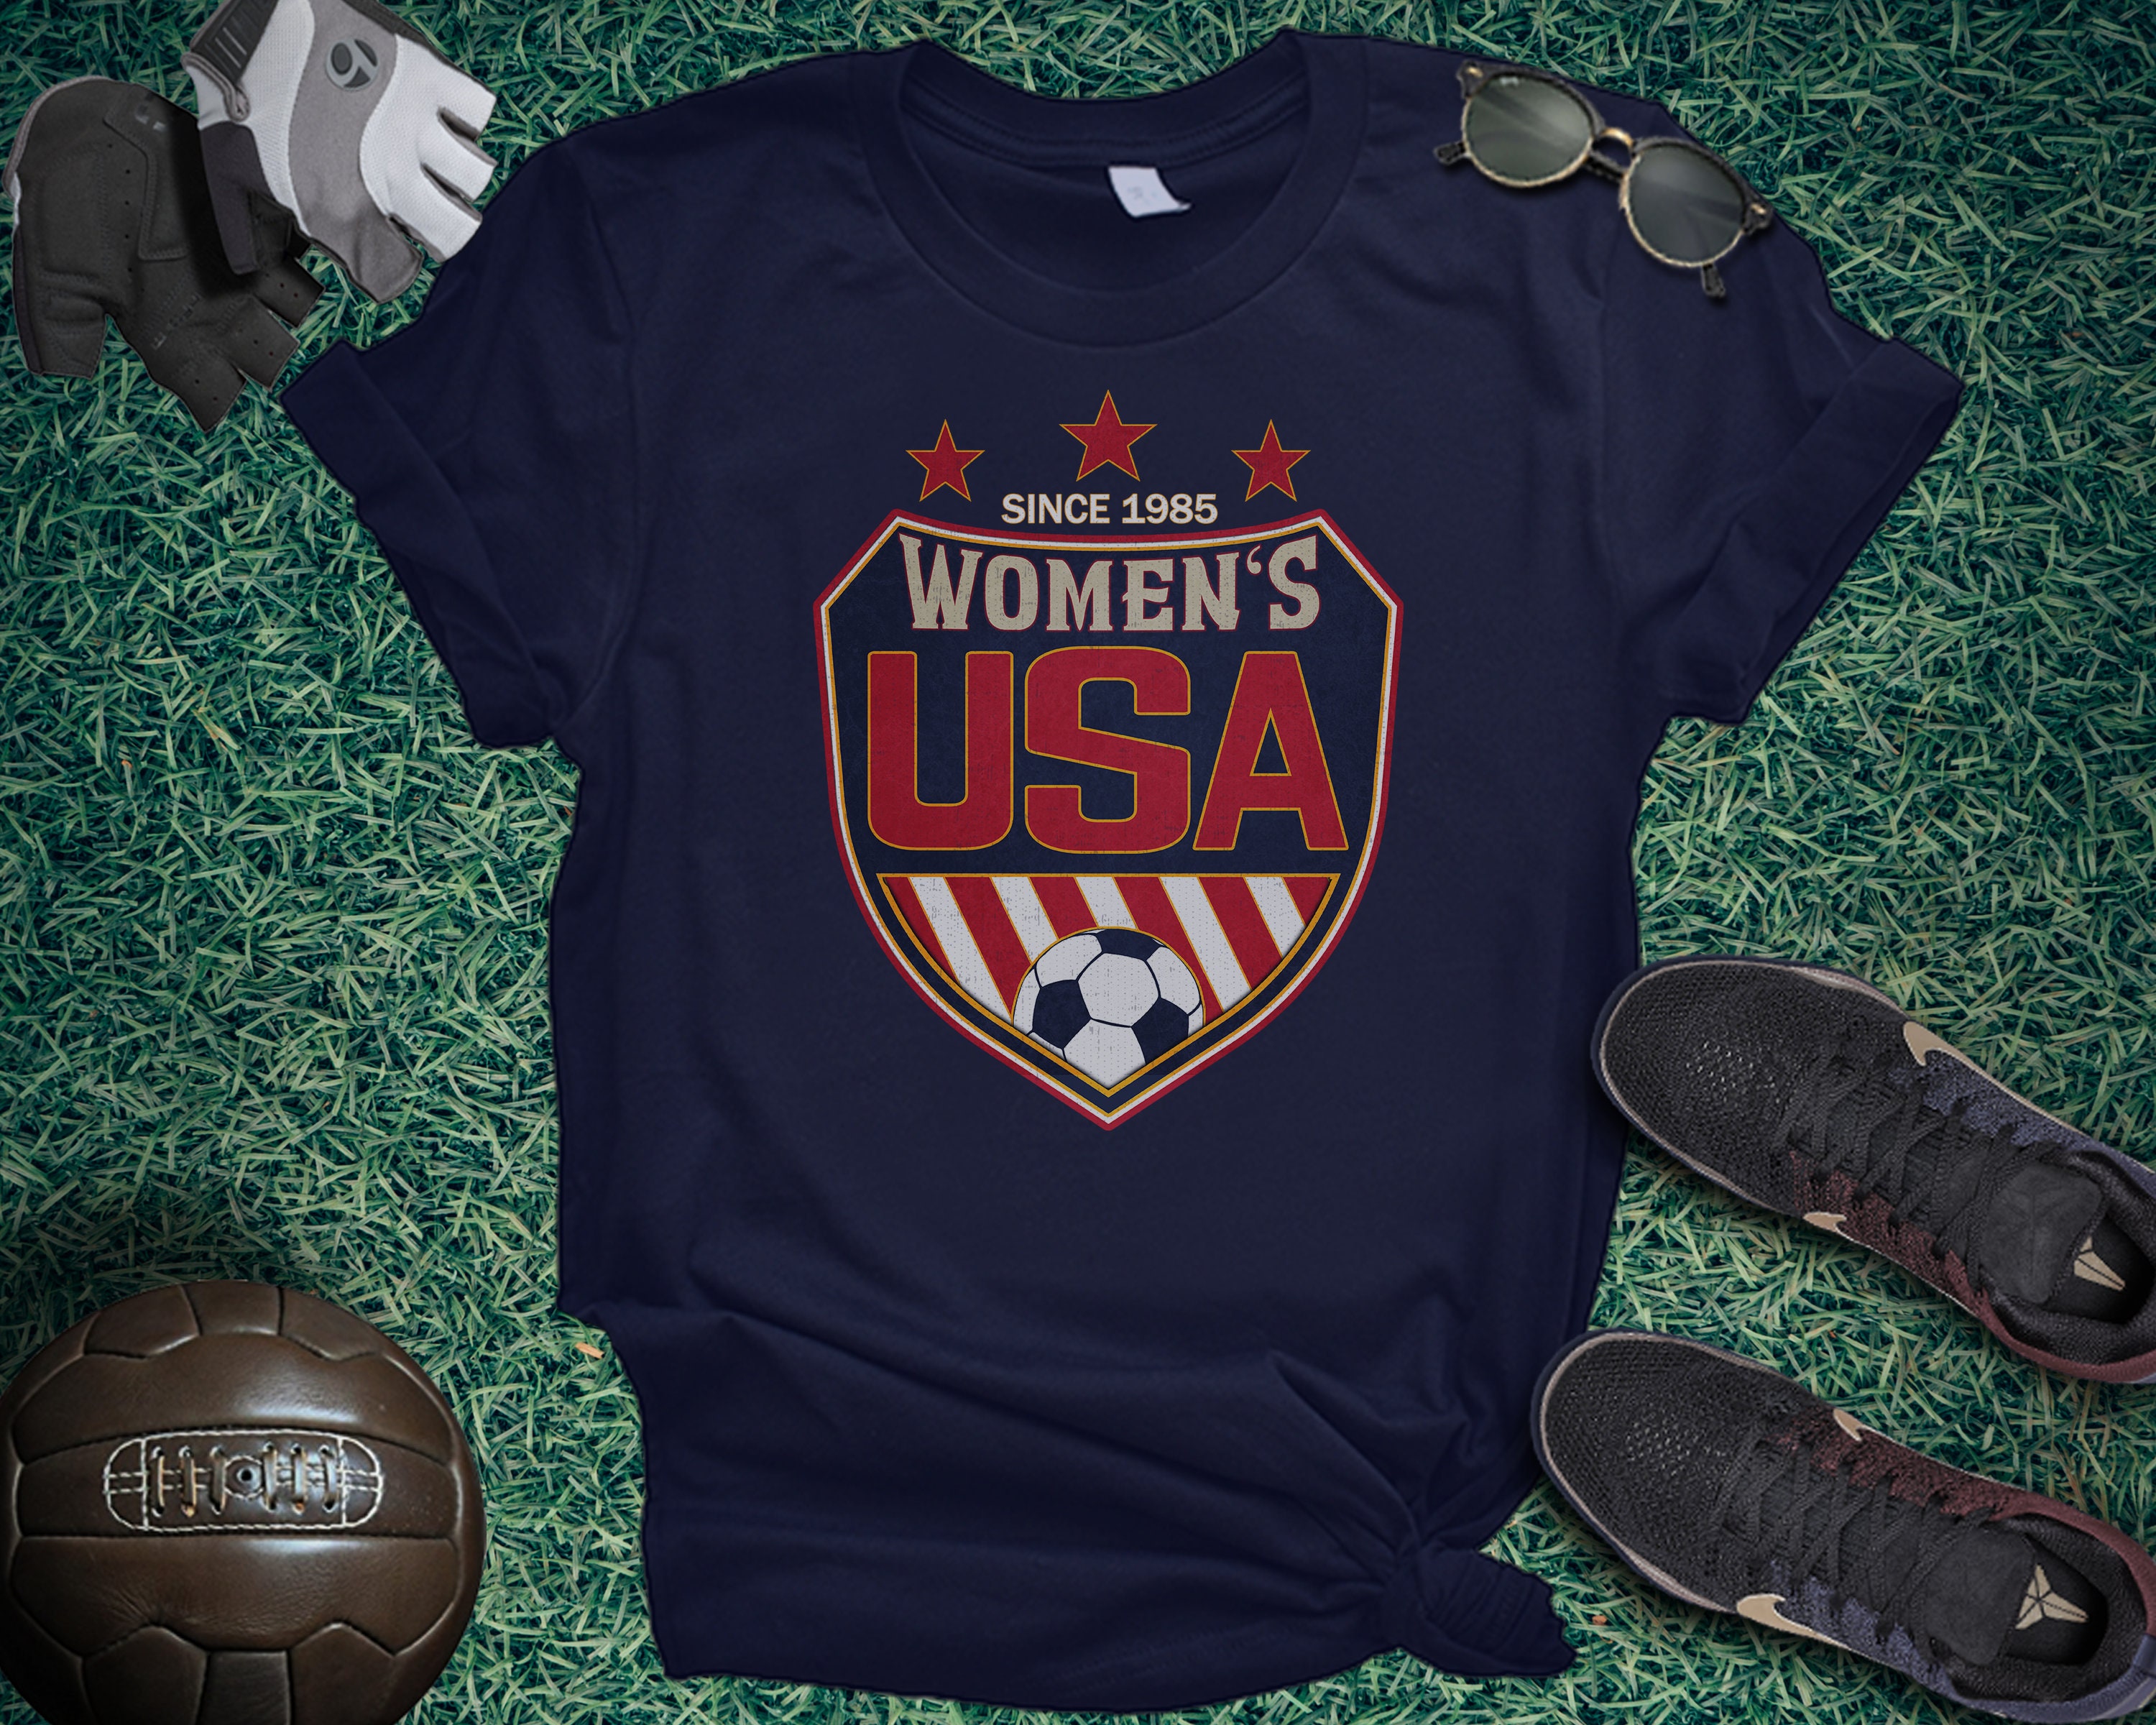 FermosApparelShop USA Women Shield Unisex T-Shirt - Womens Soccer Cup, France 2019, to Support The Best Soccer Team in The World